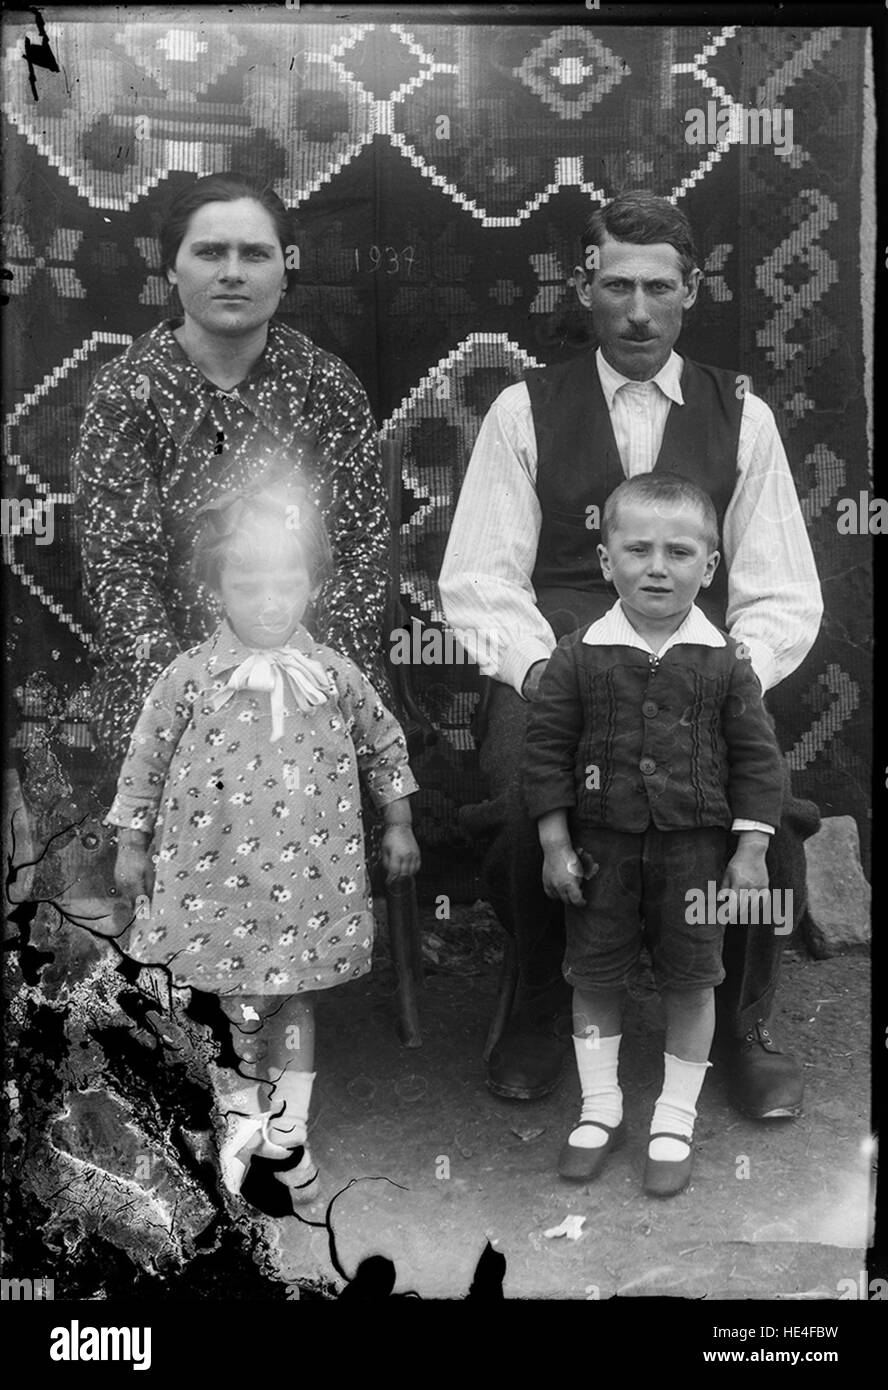 Inv. 193, 2 imagini: Portrete de familie, 1937  The project Costică Acsinte Archive needs help: please donate and share the link igg.me/at/acsinte/x/6146081 ( http://igg.me/at/acsinte/x/6146081 )   DAM by IDimager www.idimager.com/WP/?page id=20 ( http://www.idimager.com/WP/?page id=20 ) Stock Photo